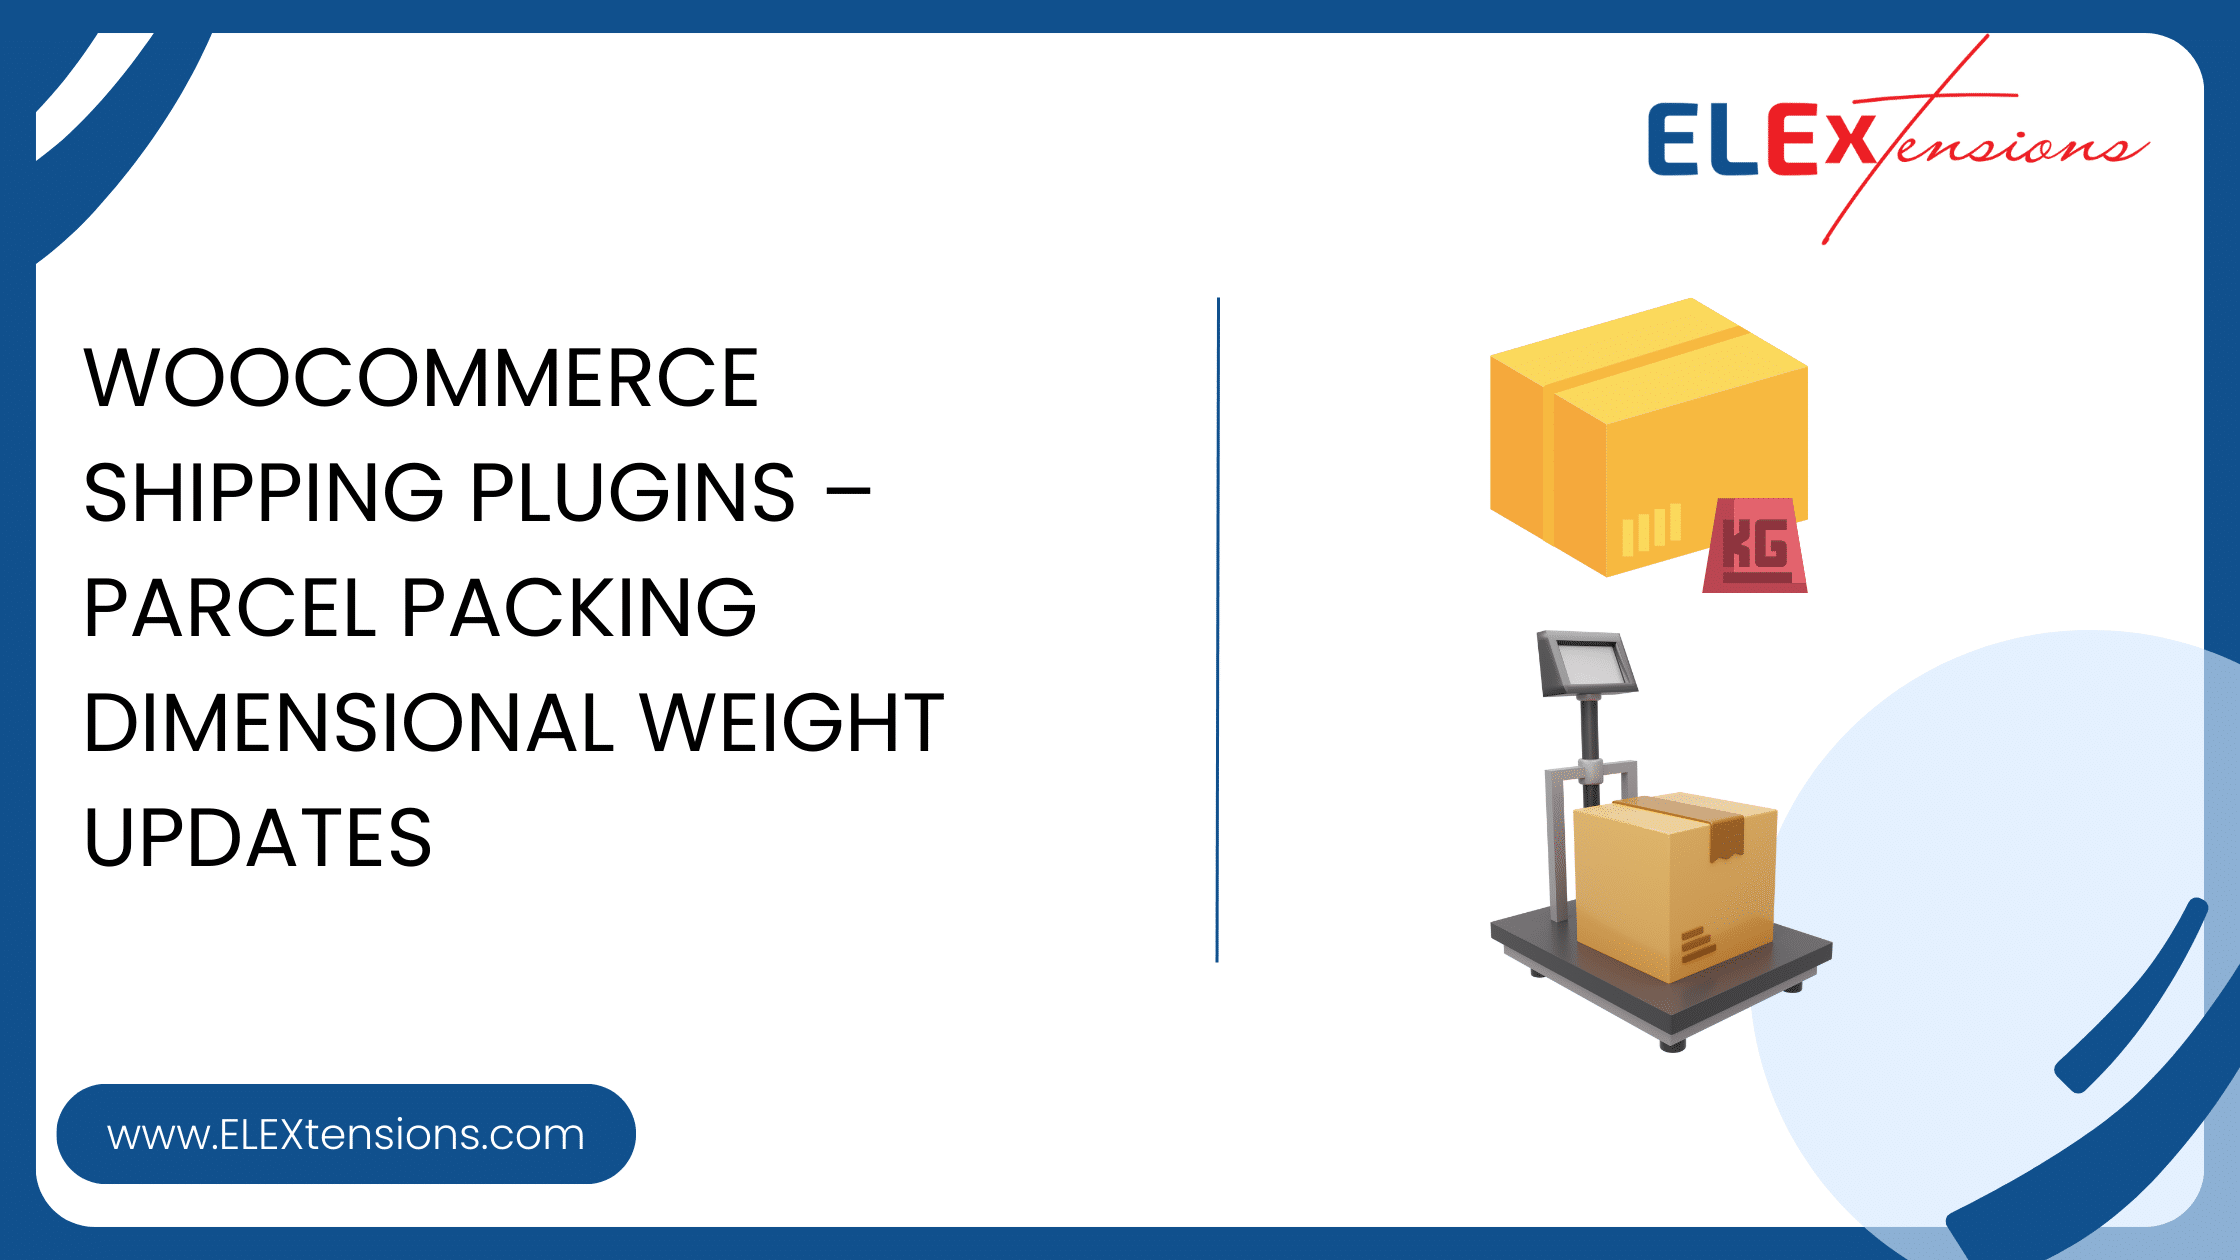 Parcel Packing Dimensional Weight Updates Banner